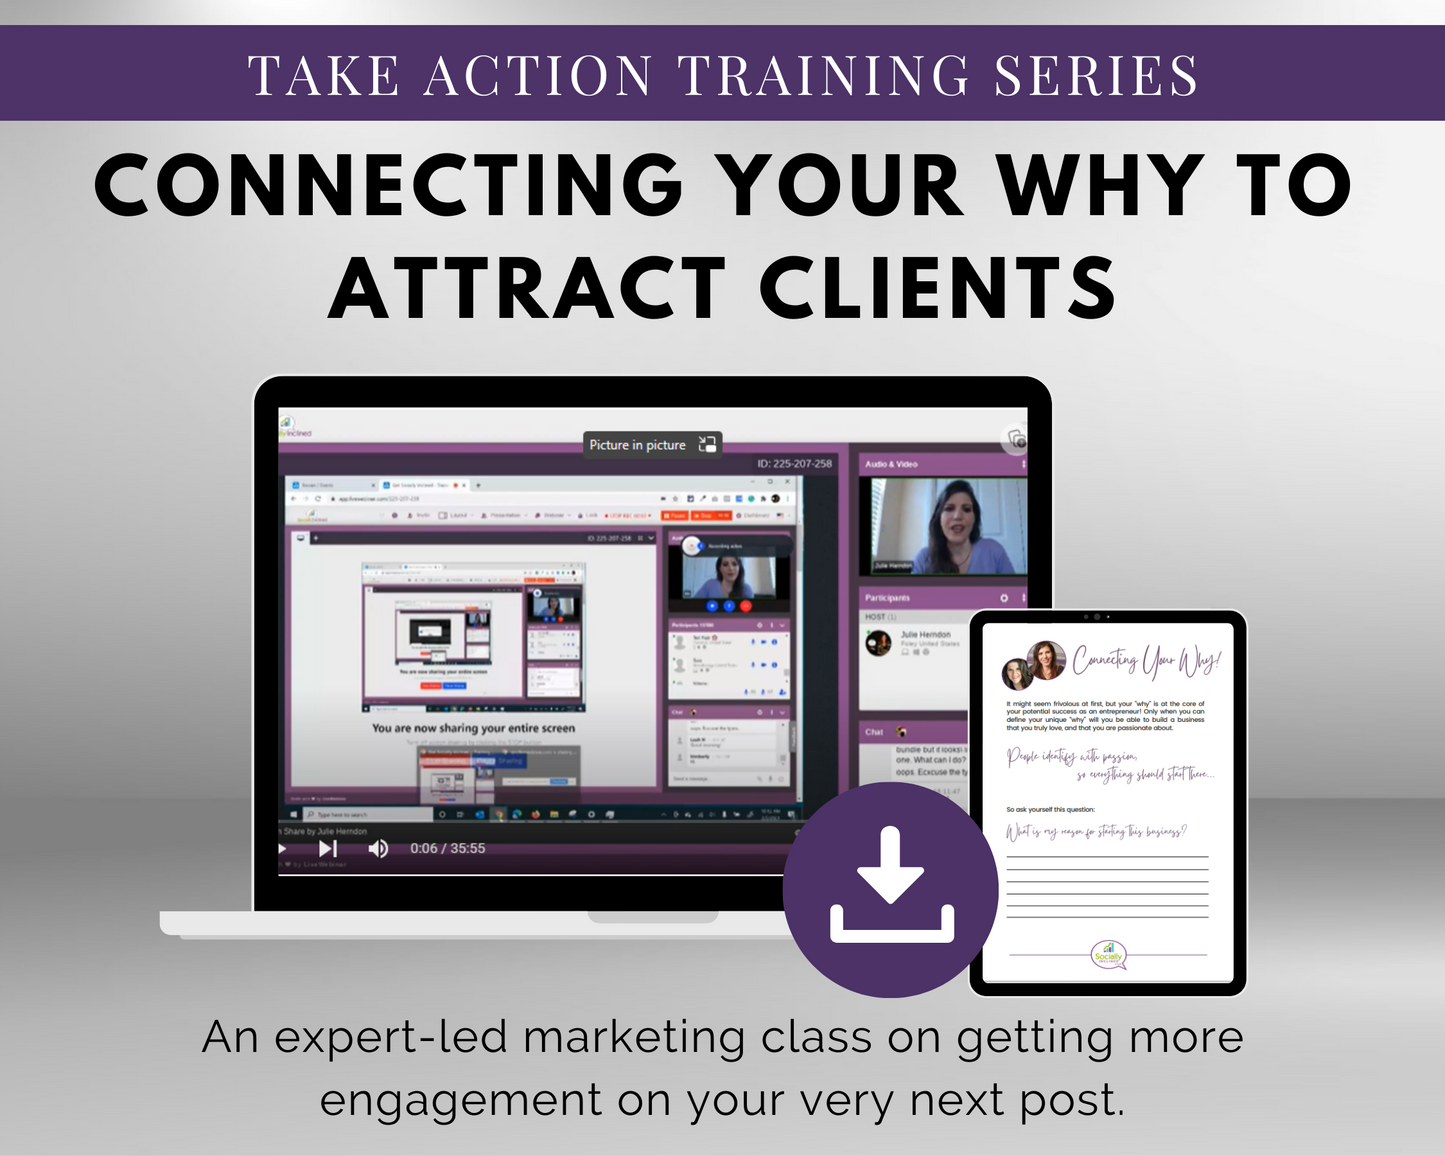 Take action training series, TAT - Connecting Your Why to Attract Clients Masterclass by Get Socially Inclined, helps you discover the power of connecting your purpose and passion to attracting potential clients. Through a series of transformative training sessions, you will learn how to effectively attract clients by understanding your why.